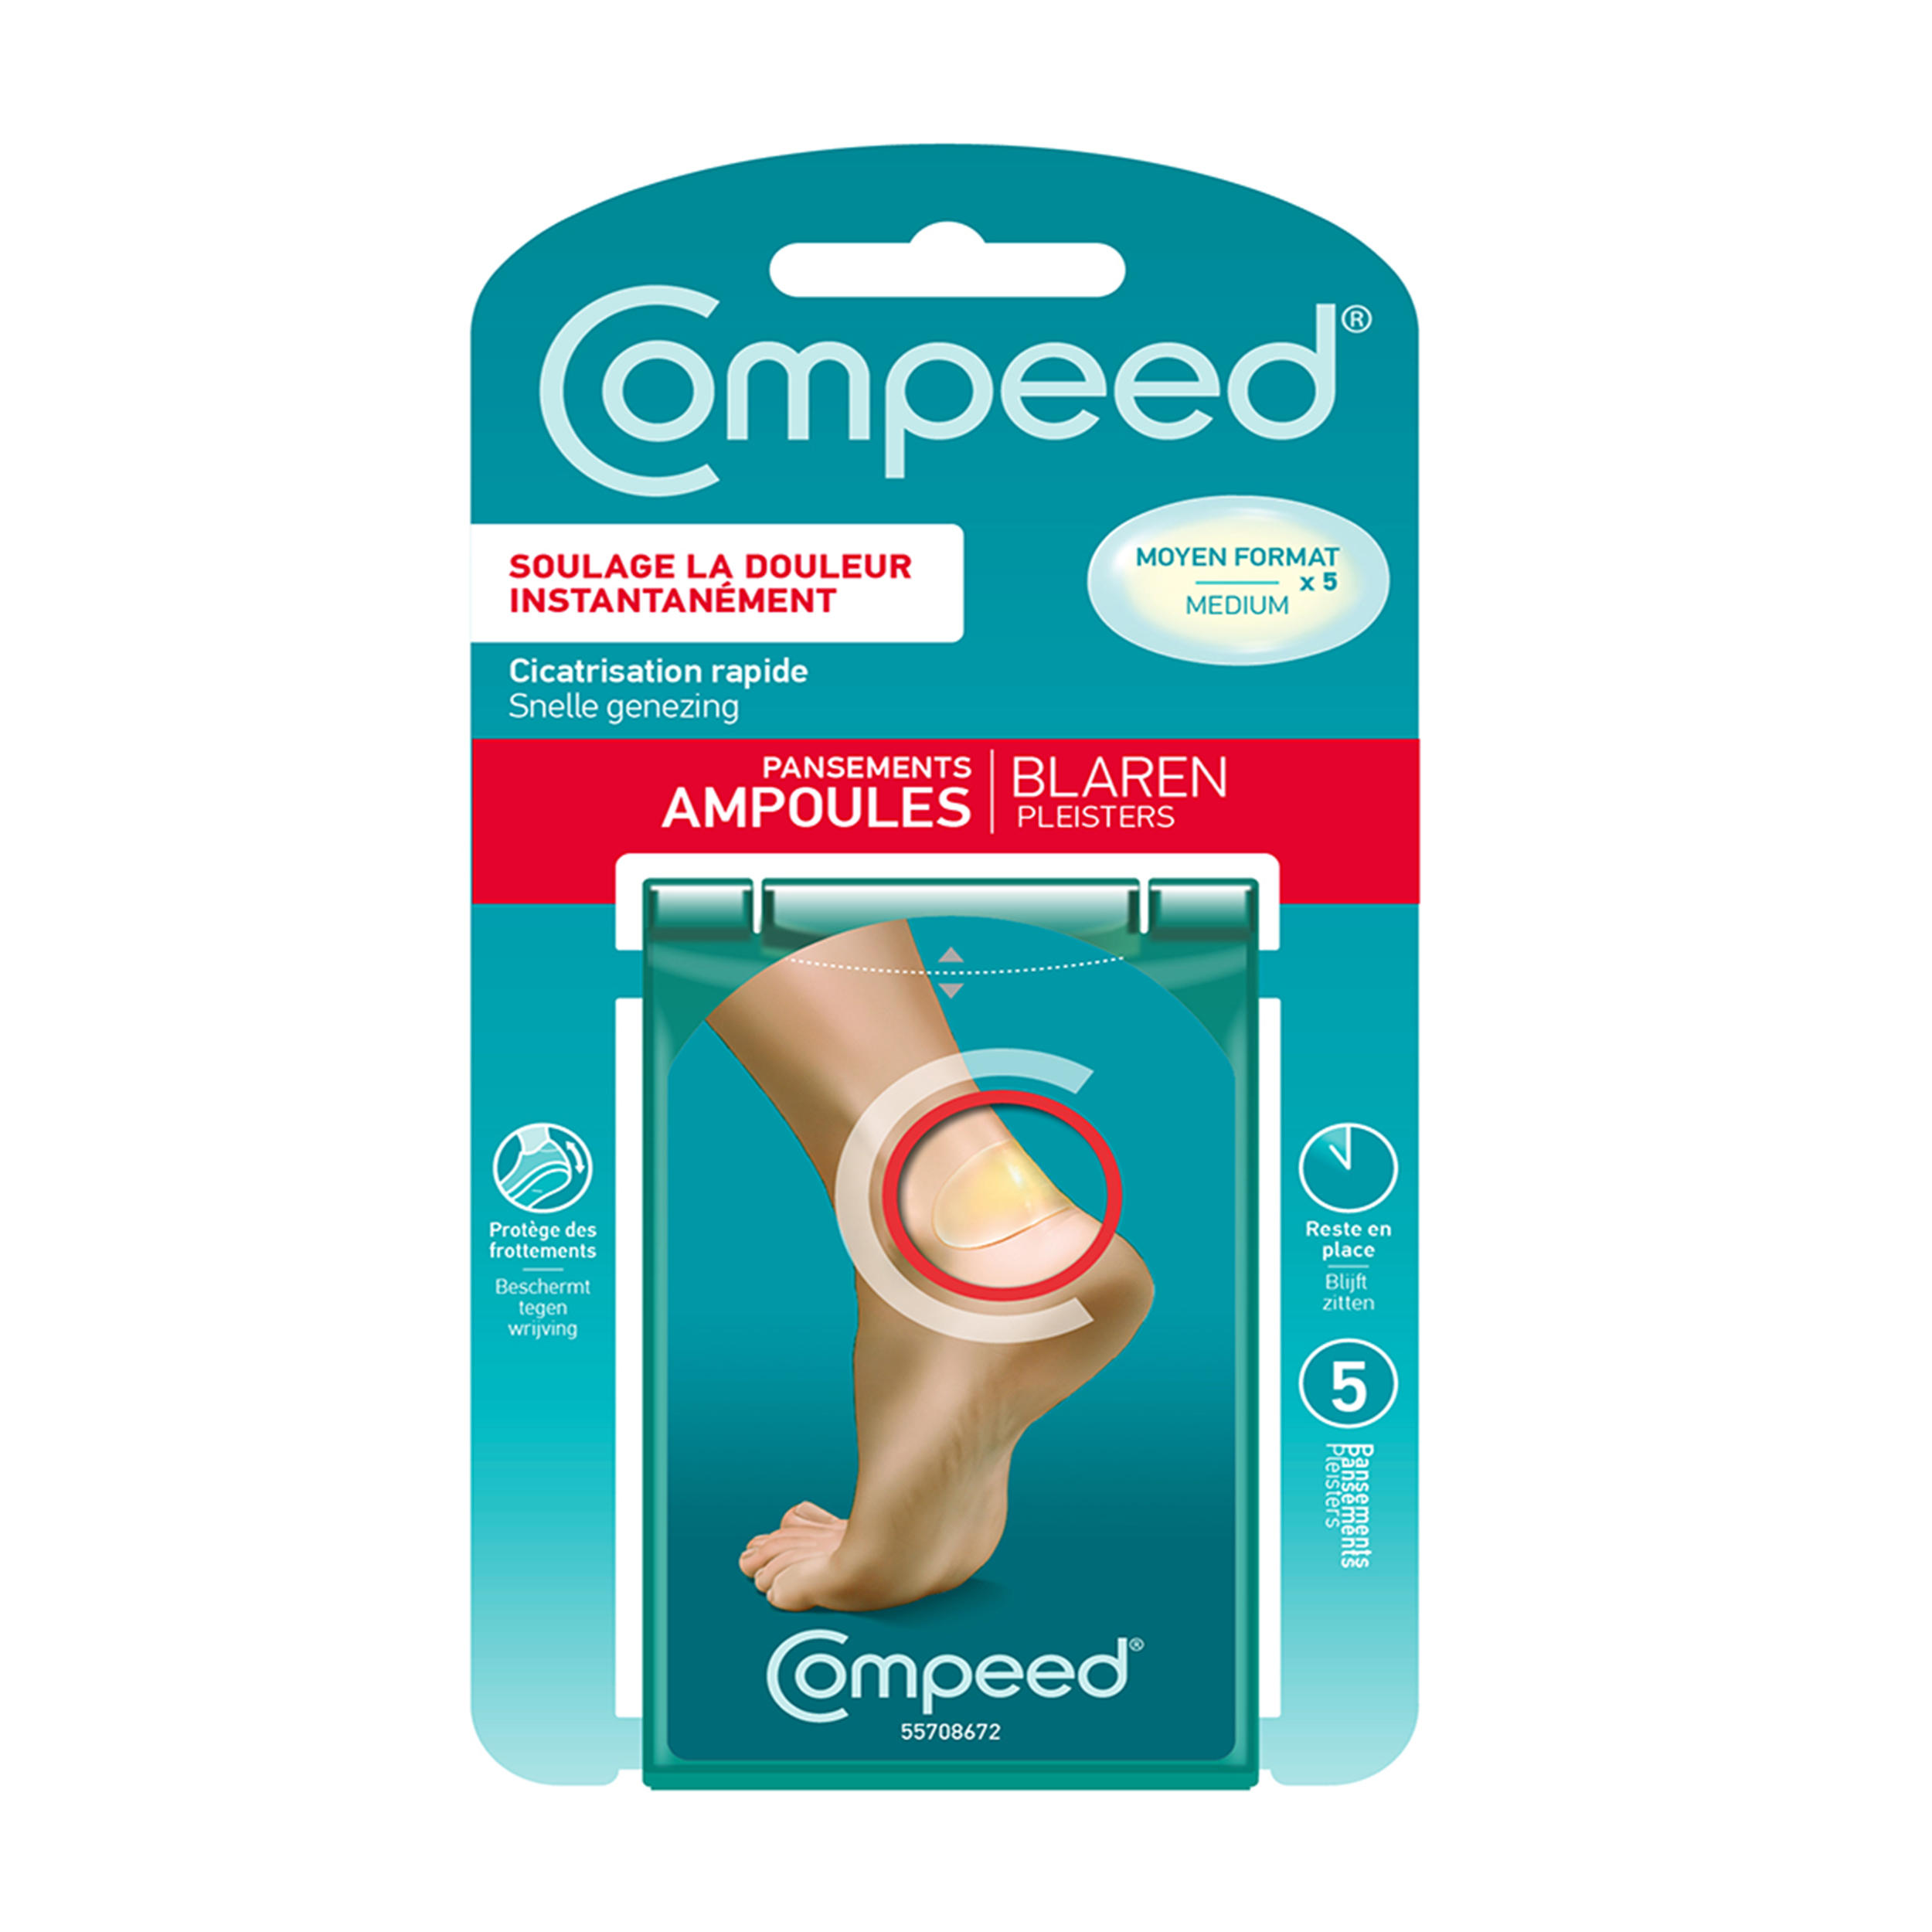 COMPEED Pansement Anti Ampoules Compeed Moyen Format -